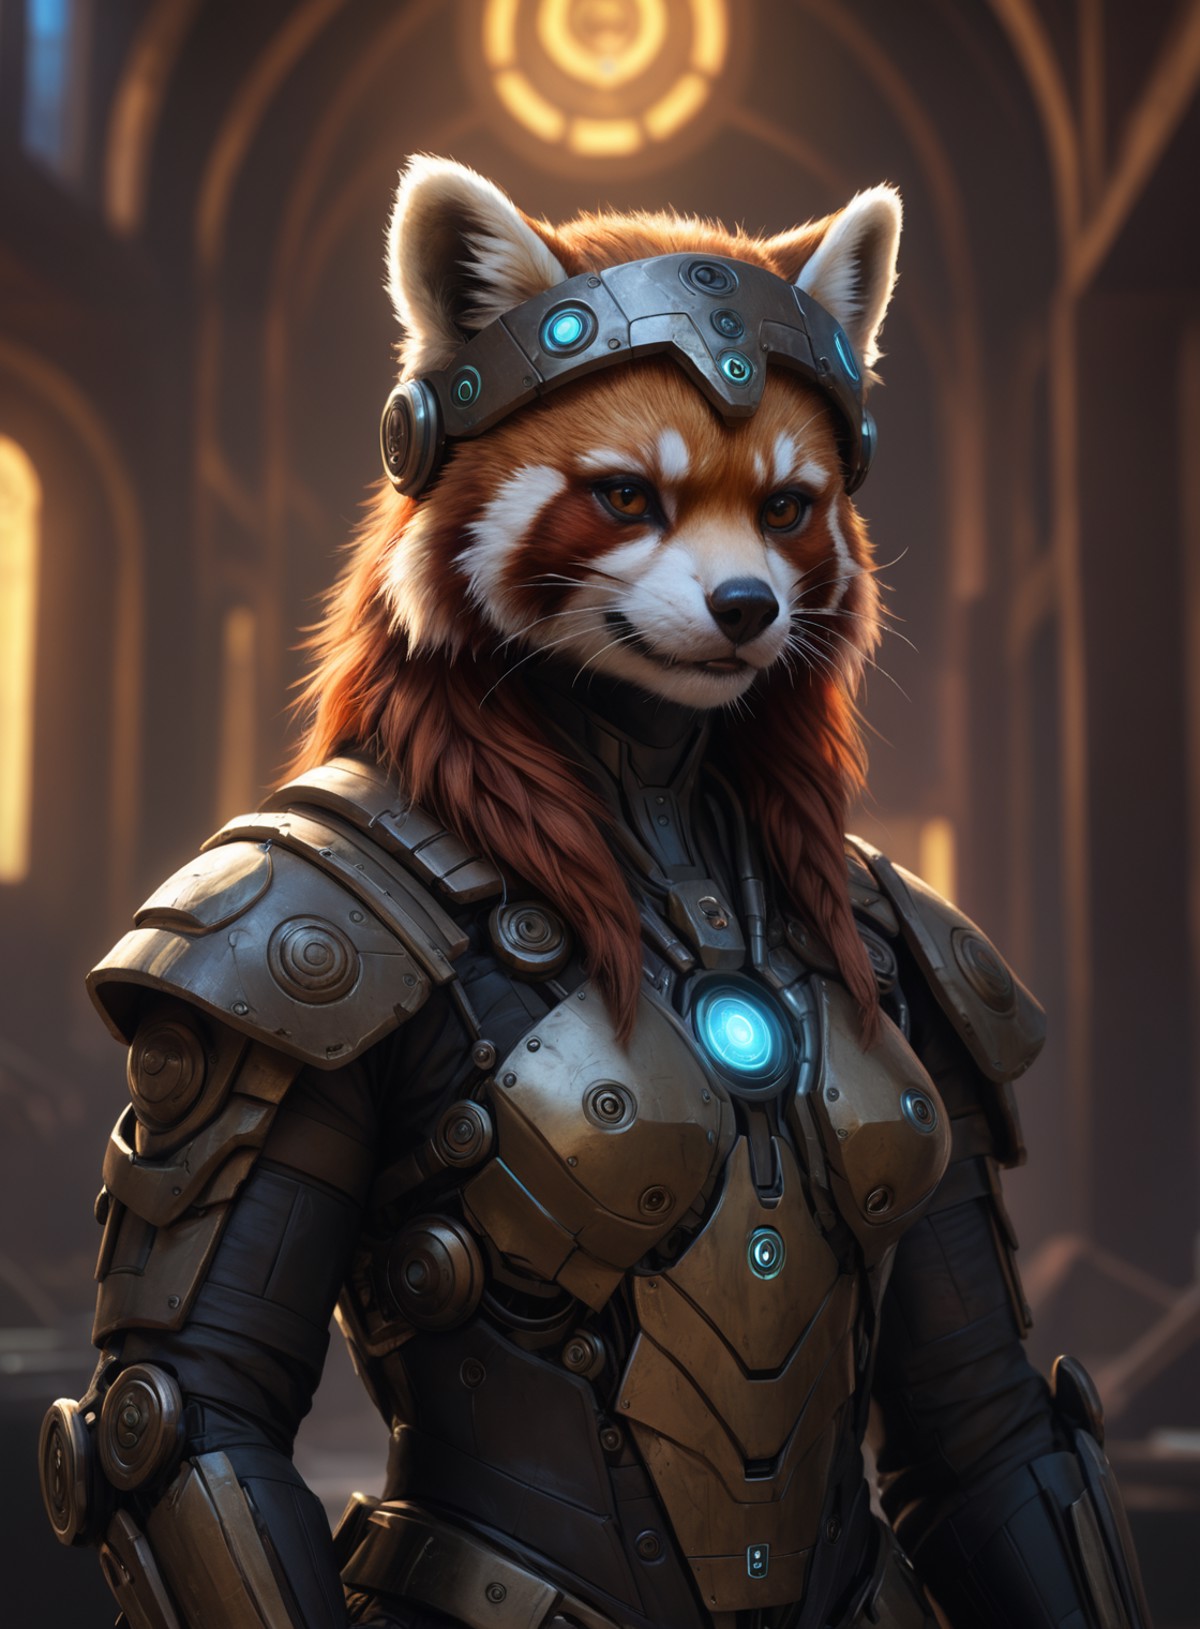 (cyberpunk viking red panda with robotic parts epic background glowing runes), alluring portrait, intricate, highly detail...